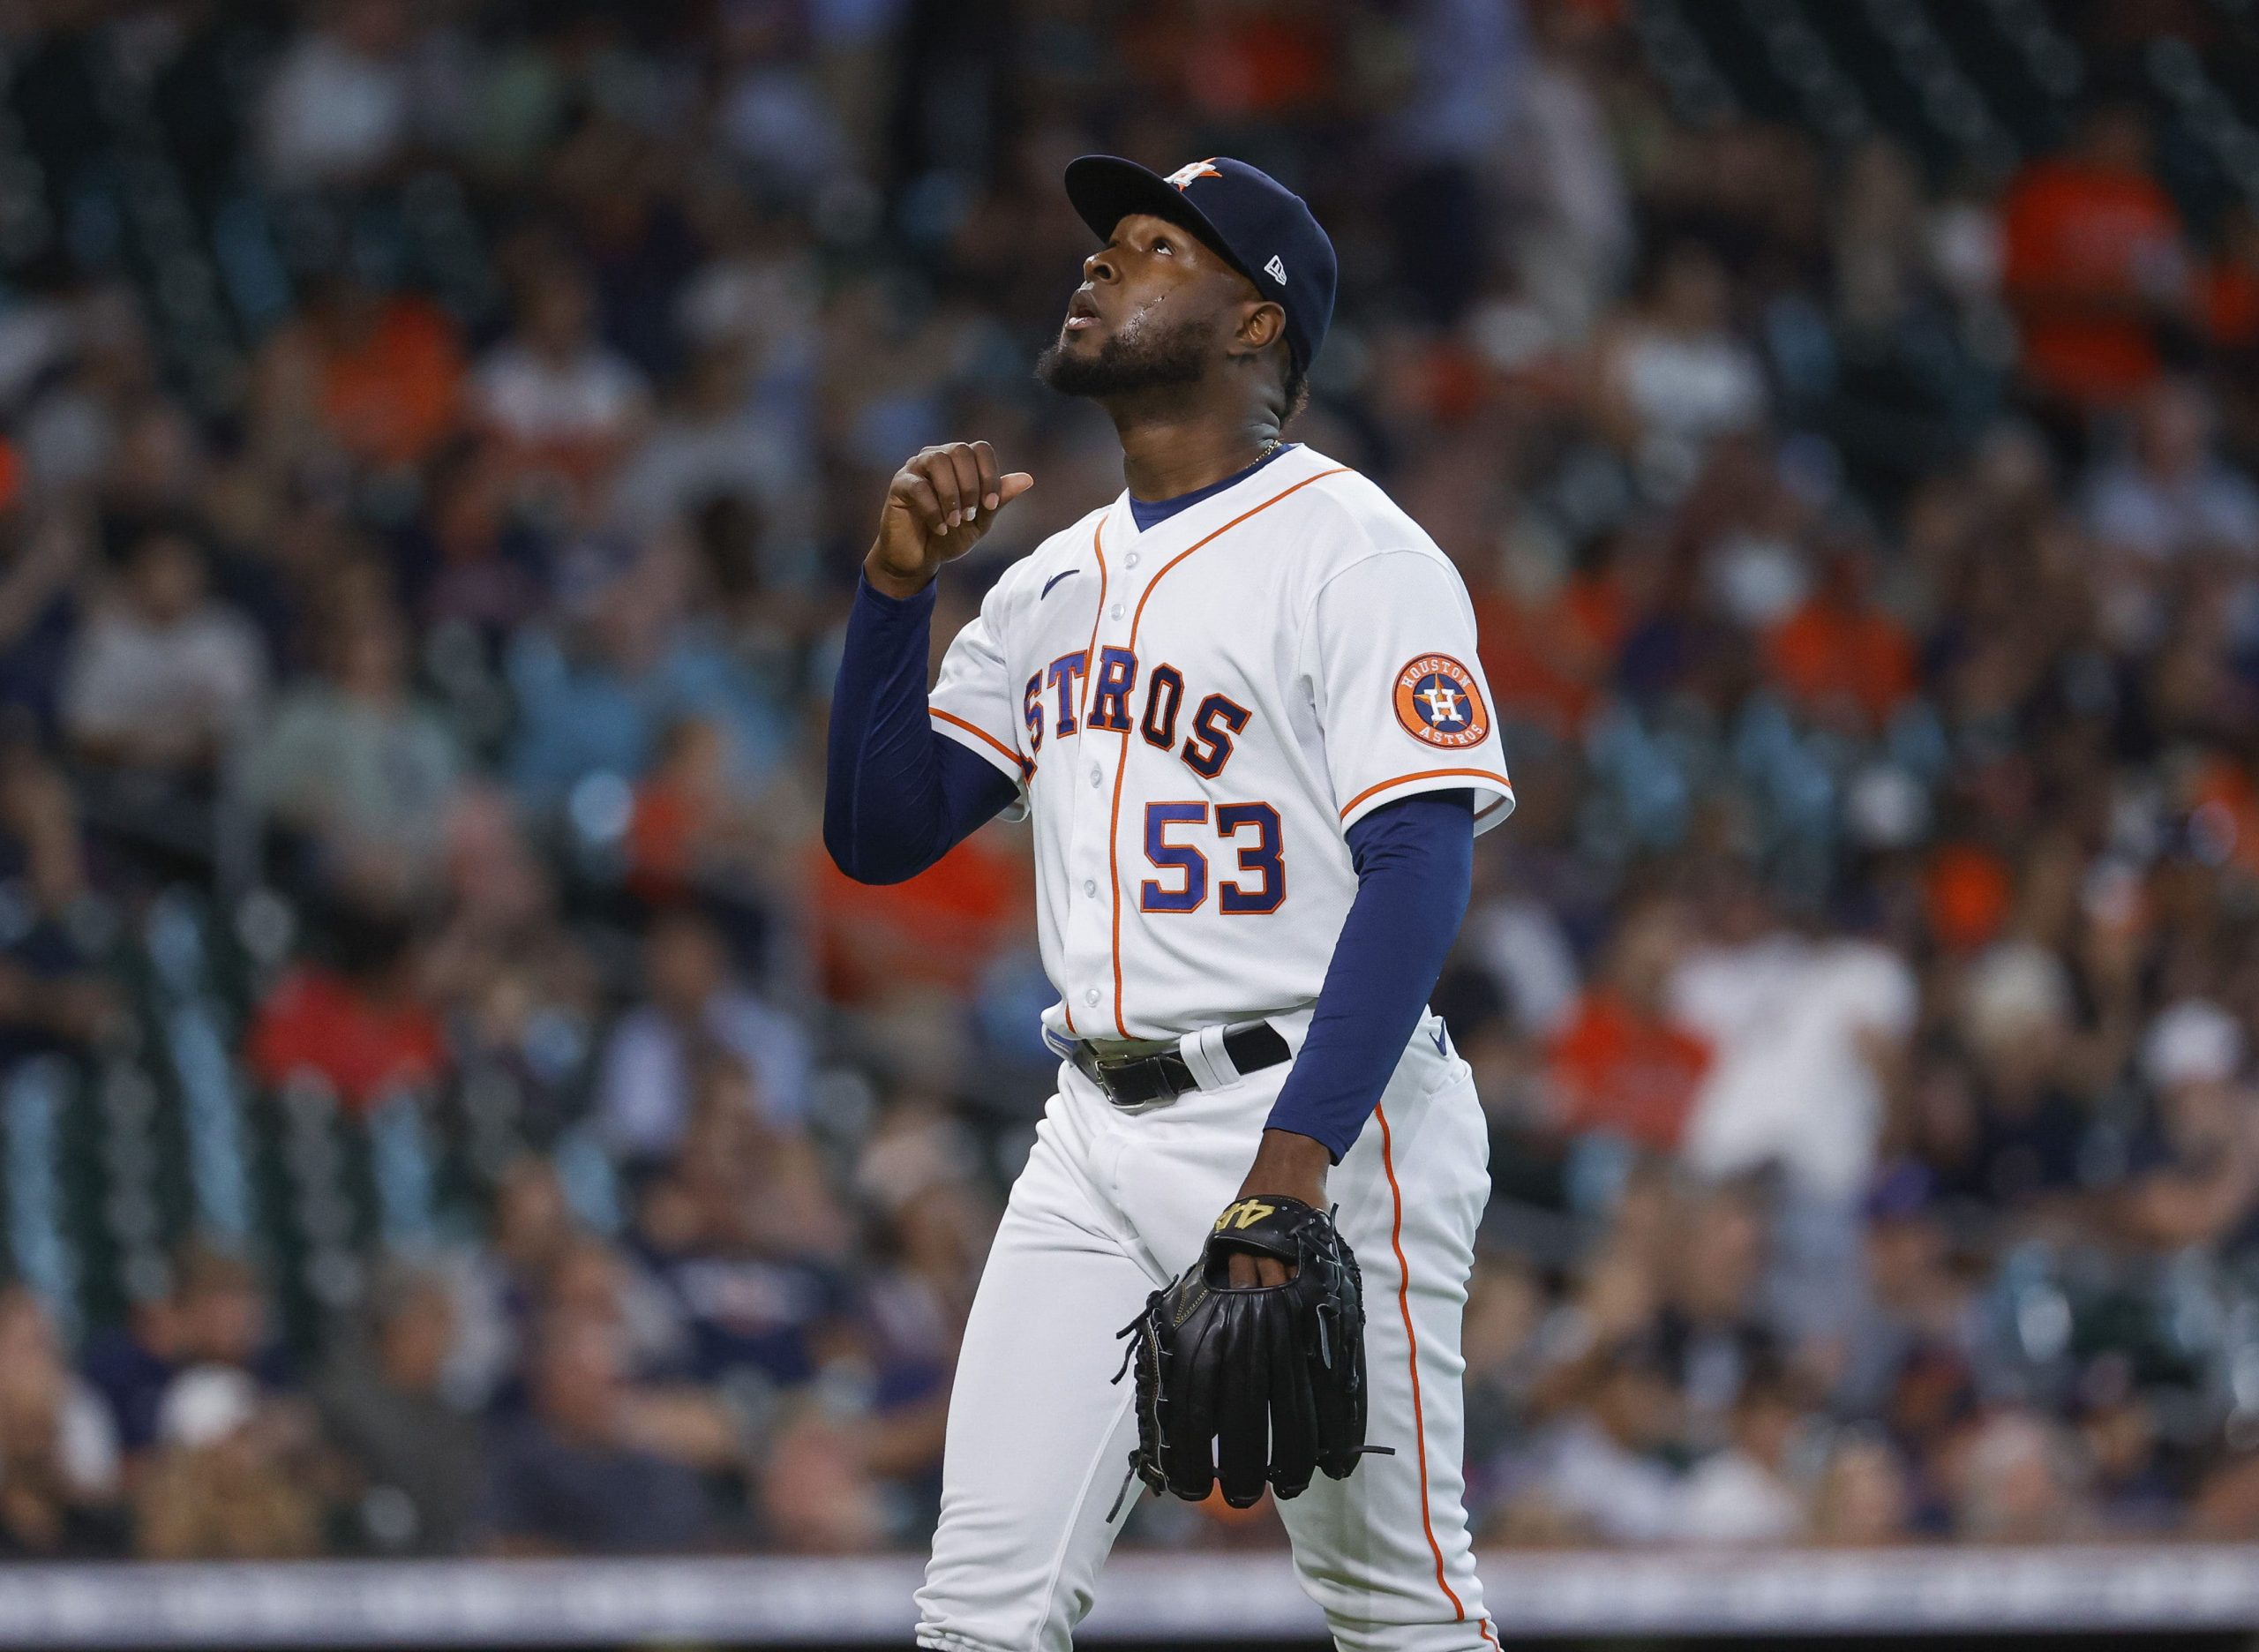 Houston Astros starting pitcher Cristian Javier (53) walks off the mound after pitching during the first inning against the Cleveland Guardians at Minute Maid Park.